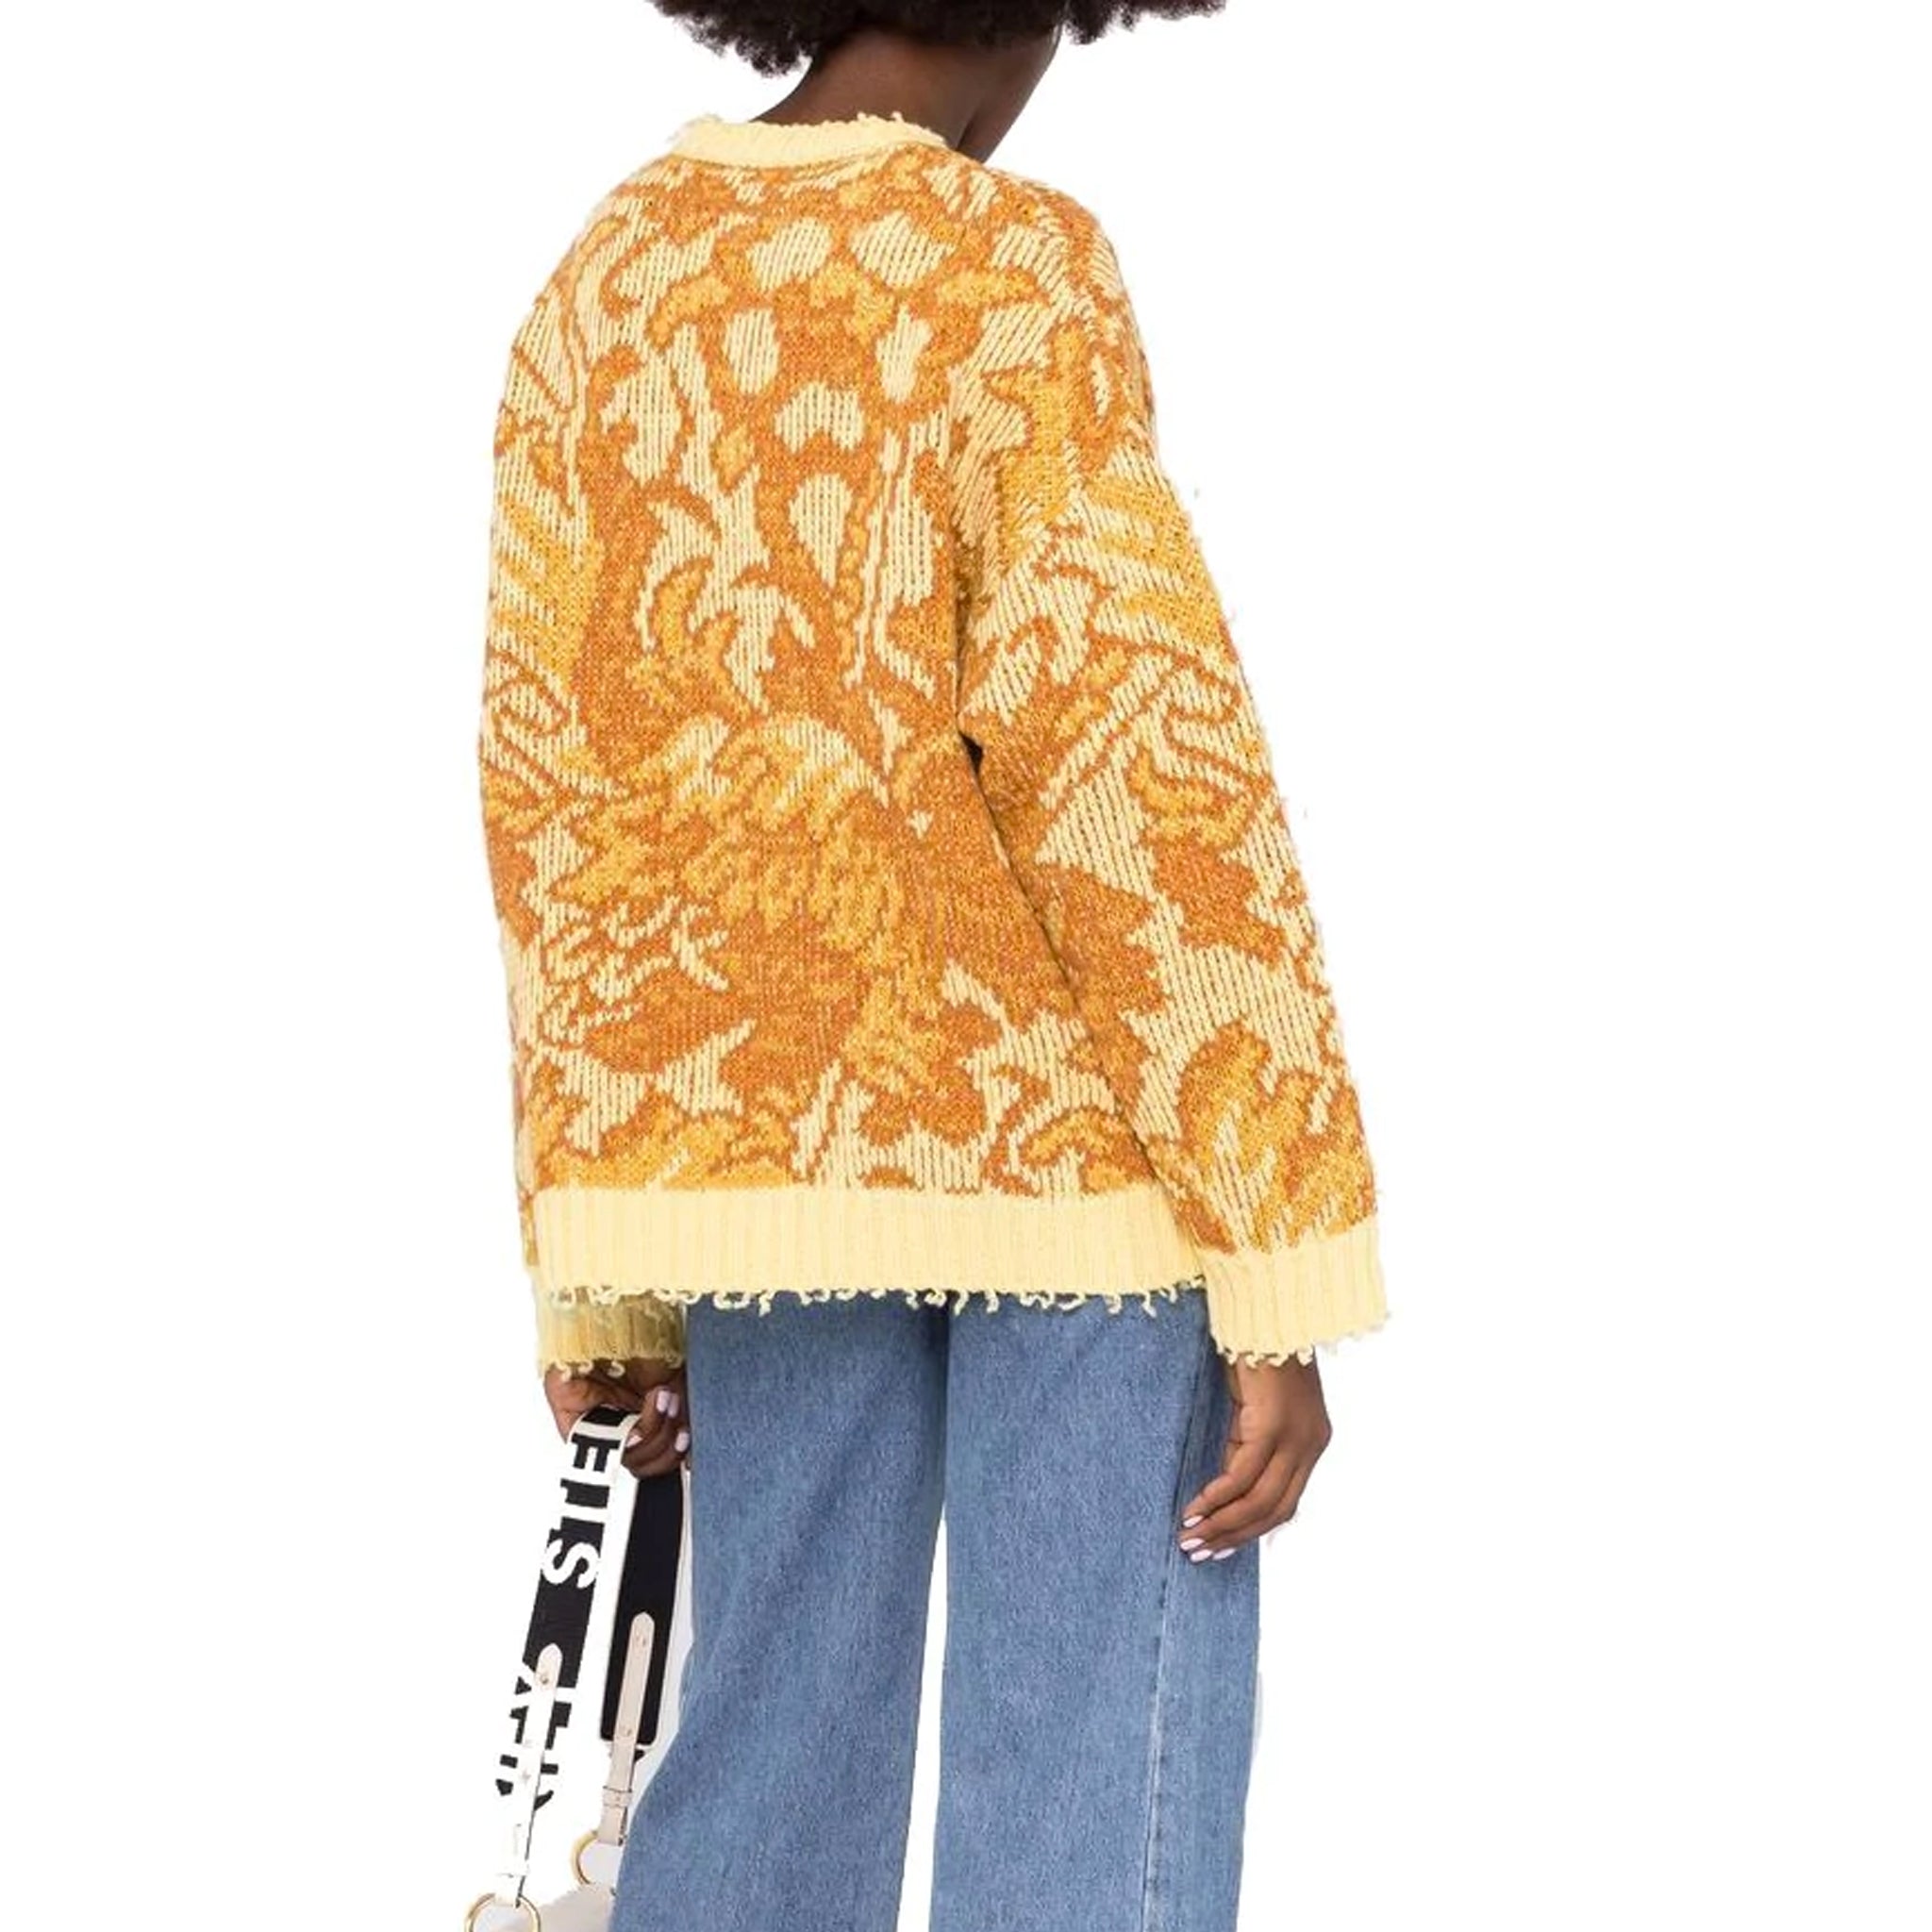 ETRO-OUTLET-SALE-Etro-Jacquard-Wool-Sweater-Strick-YELLOW-M-ARCHIVE-COLLECTION-3.jpg